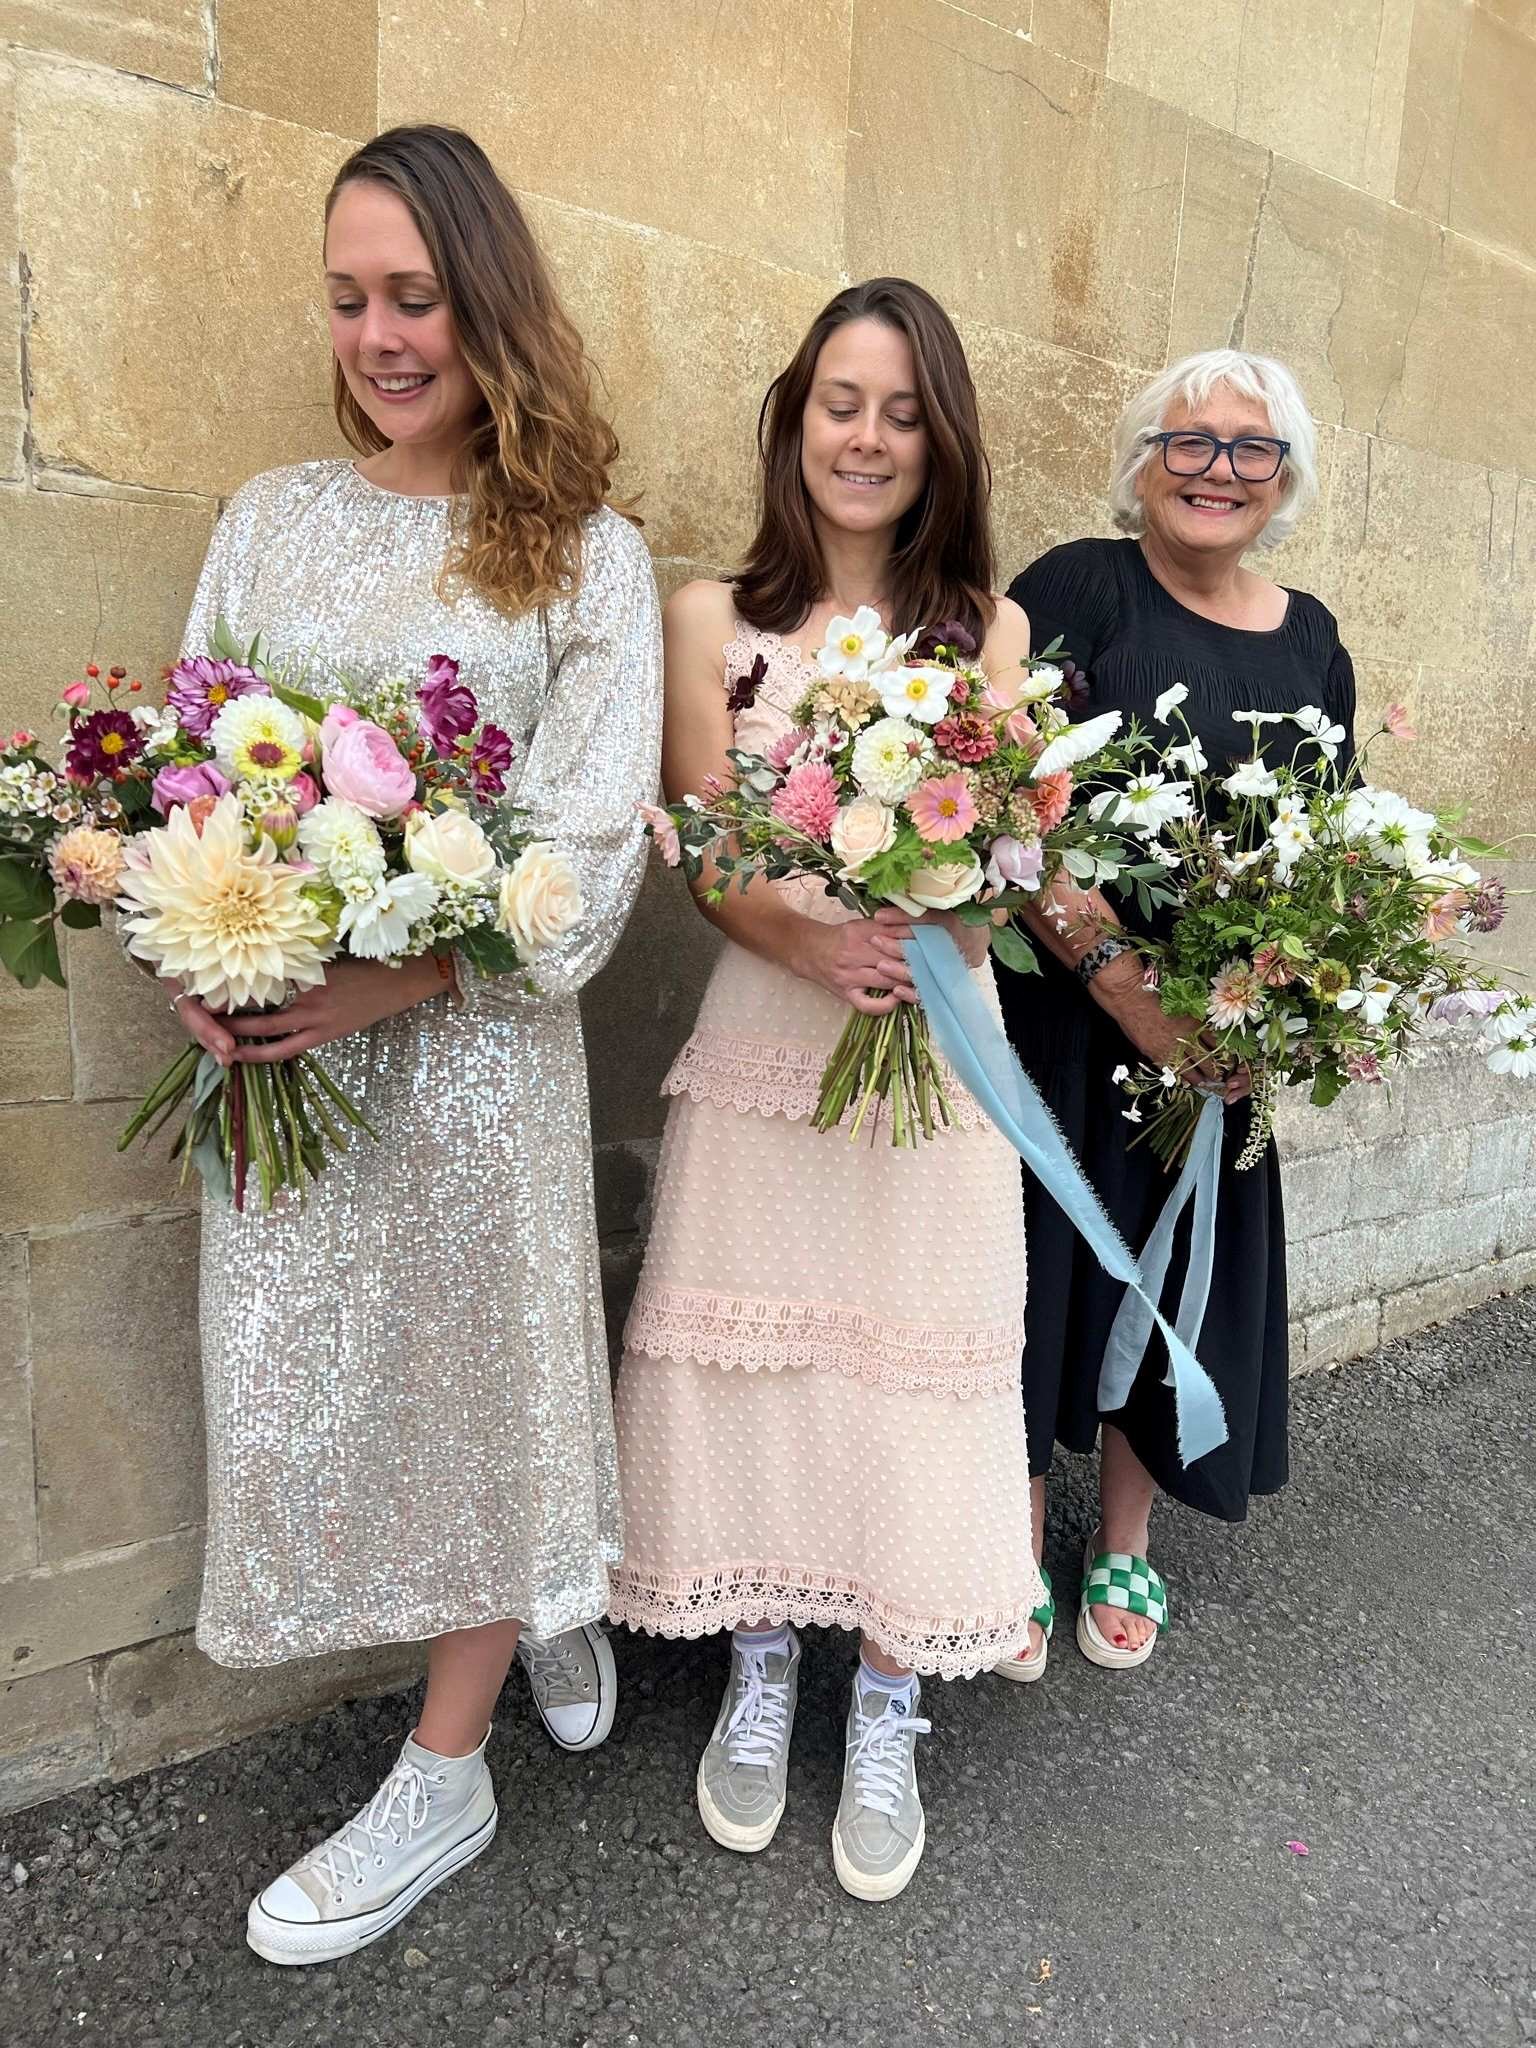 Students in wedding dresses holding their bridal bouquet creations